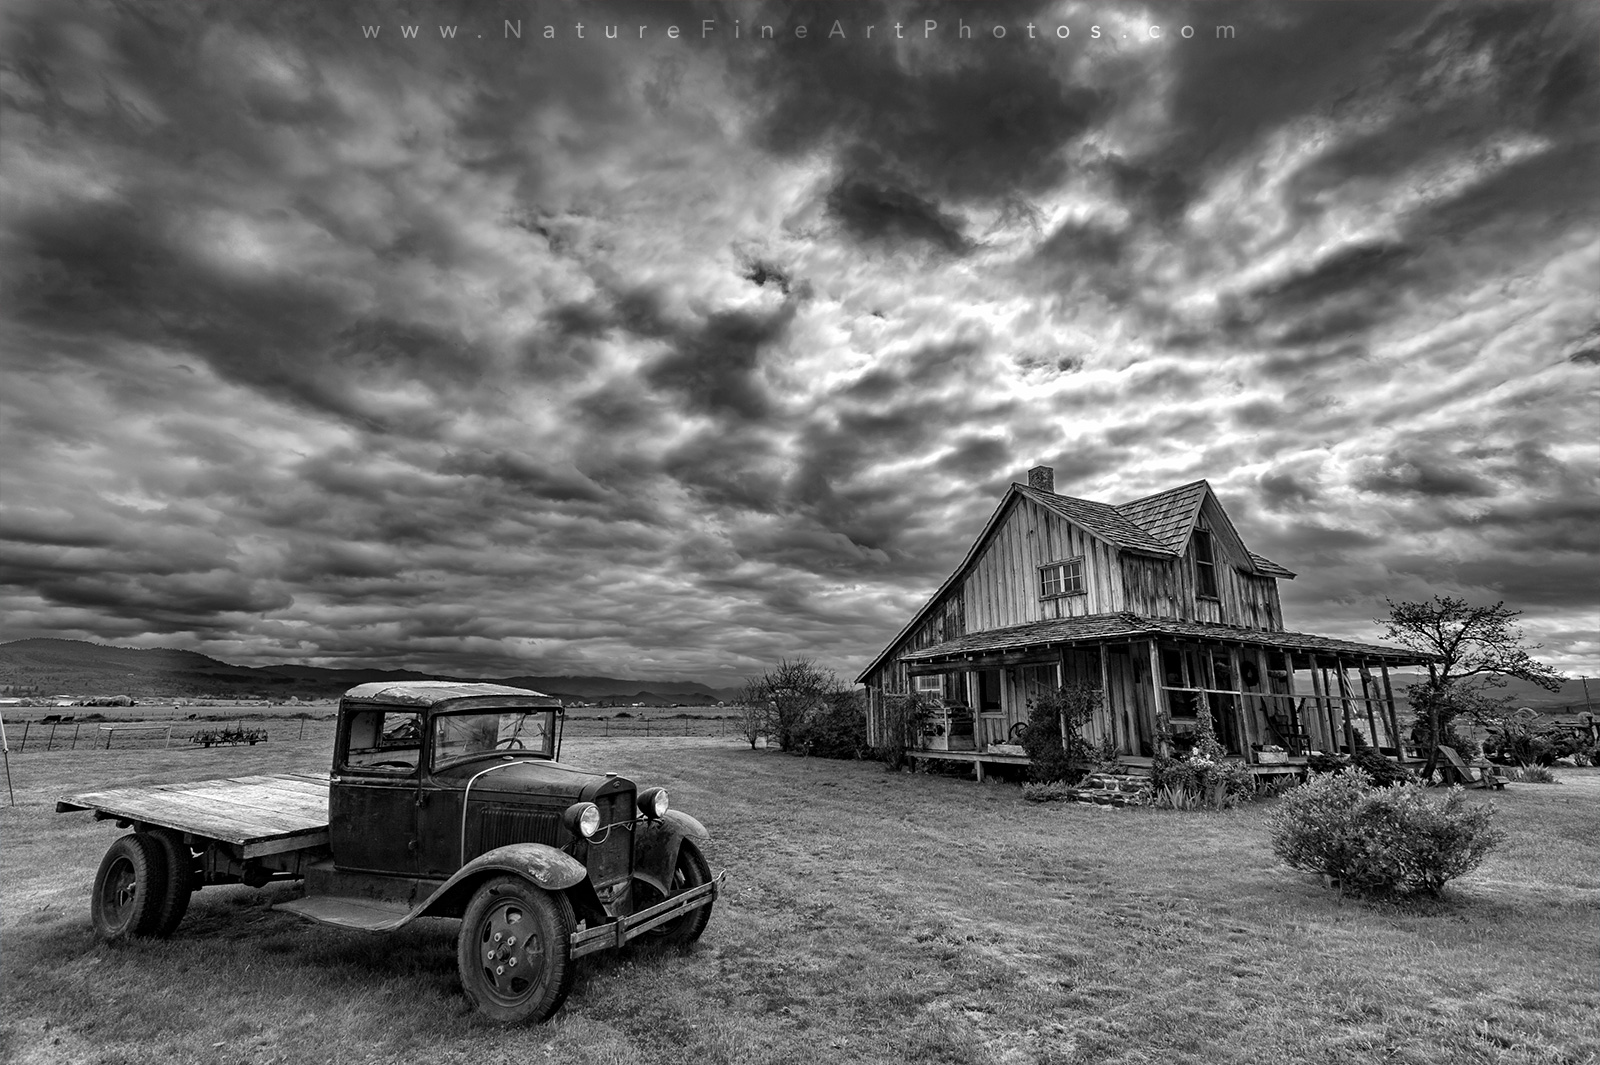 tegnebog anbefale vejr Black and white photo of Old Historic House | Nature Photos